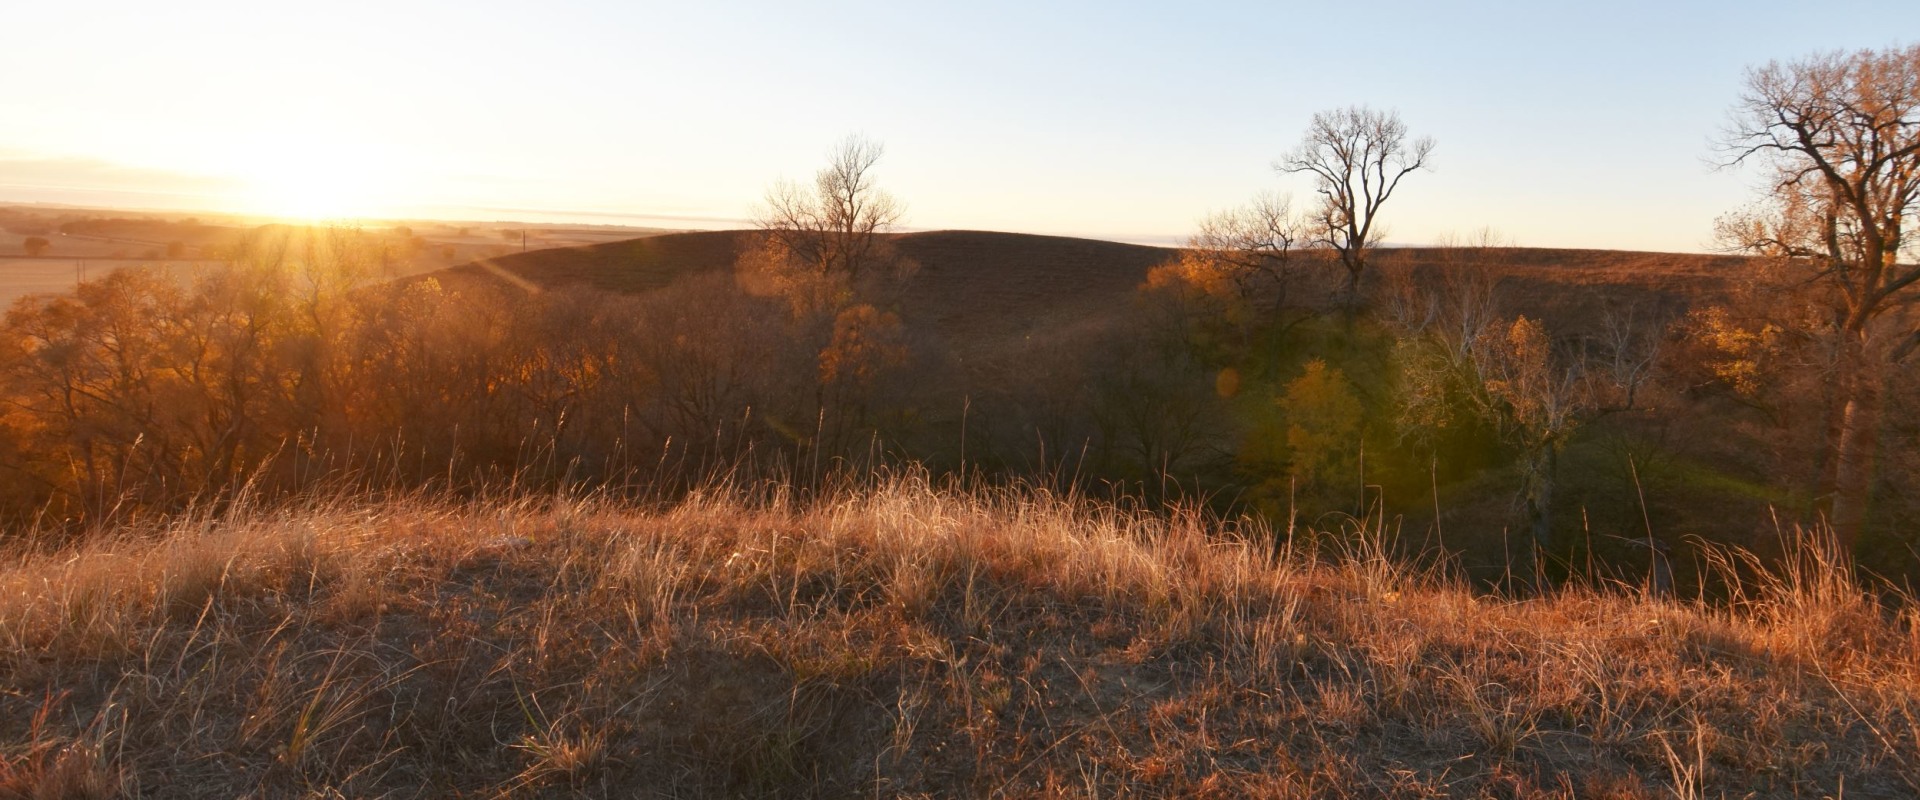 Donate to the Missouri Conservation Heritage Foundation and Help Preserve the Region's History